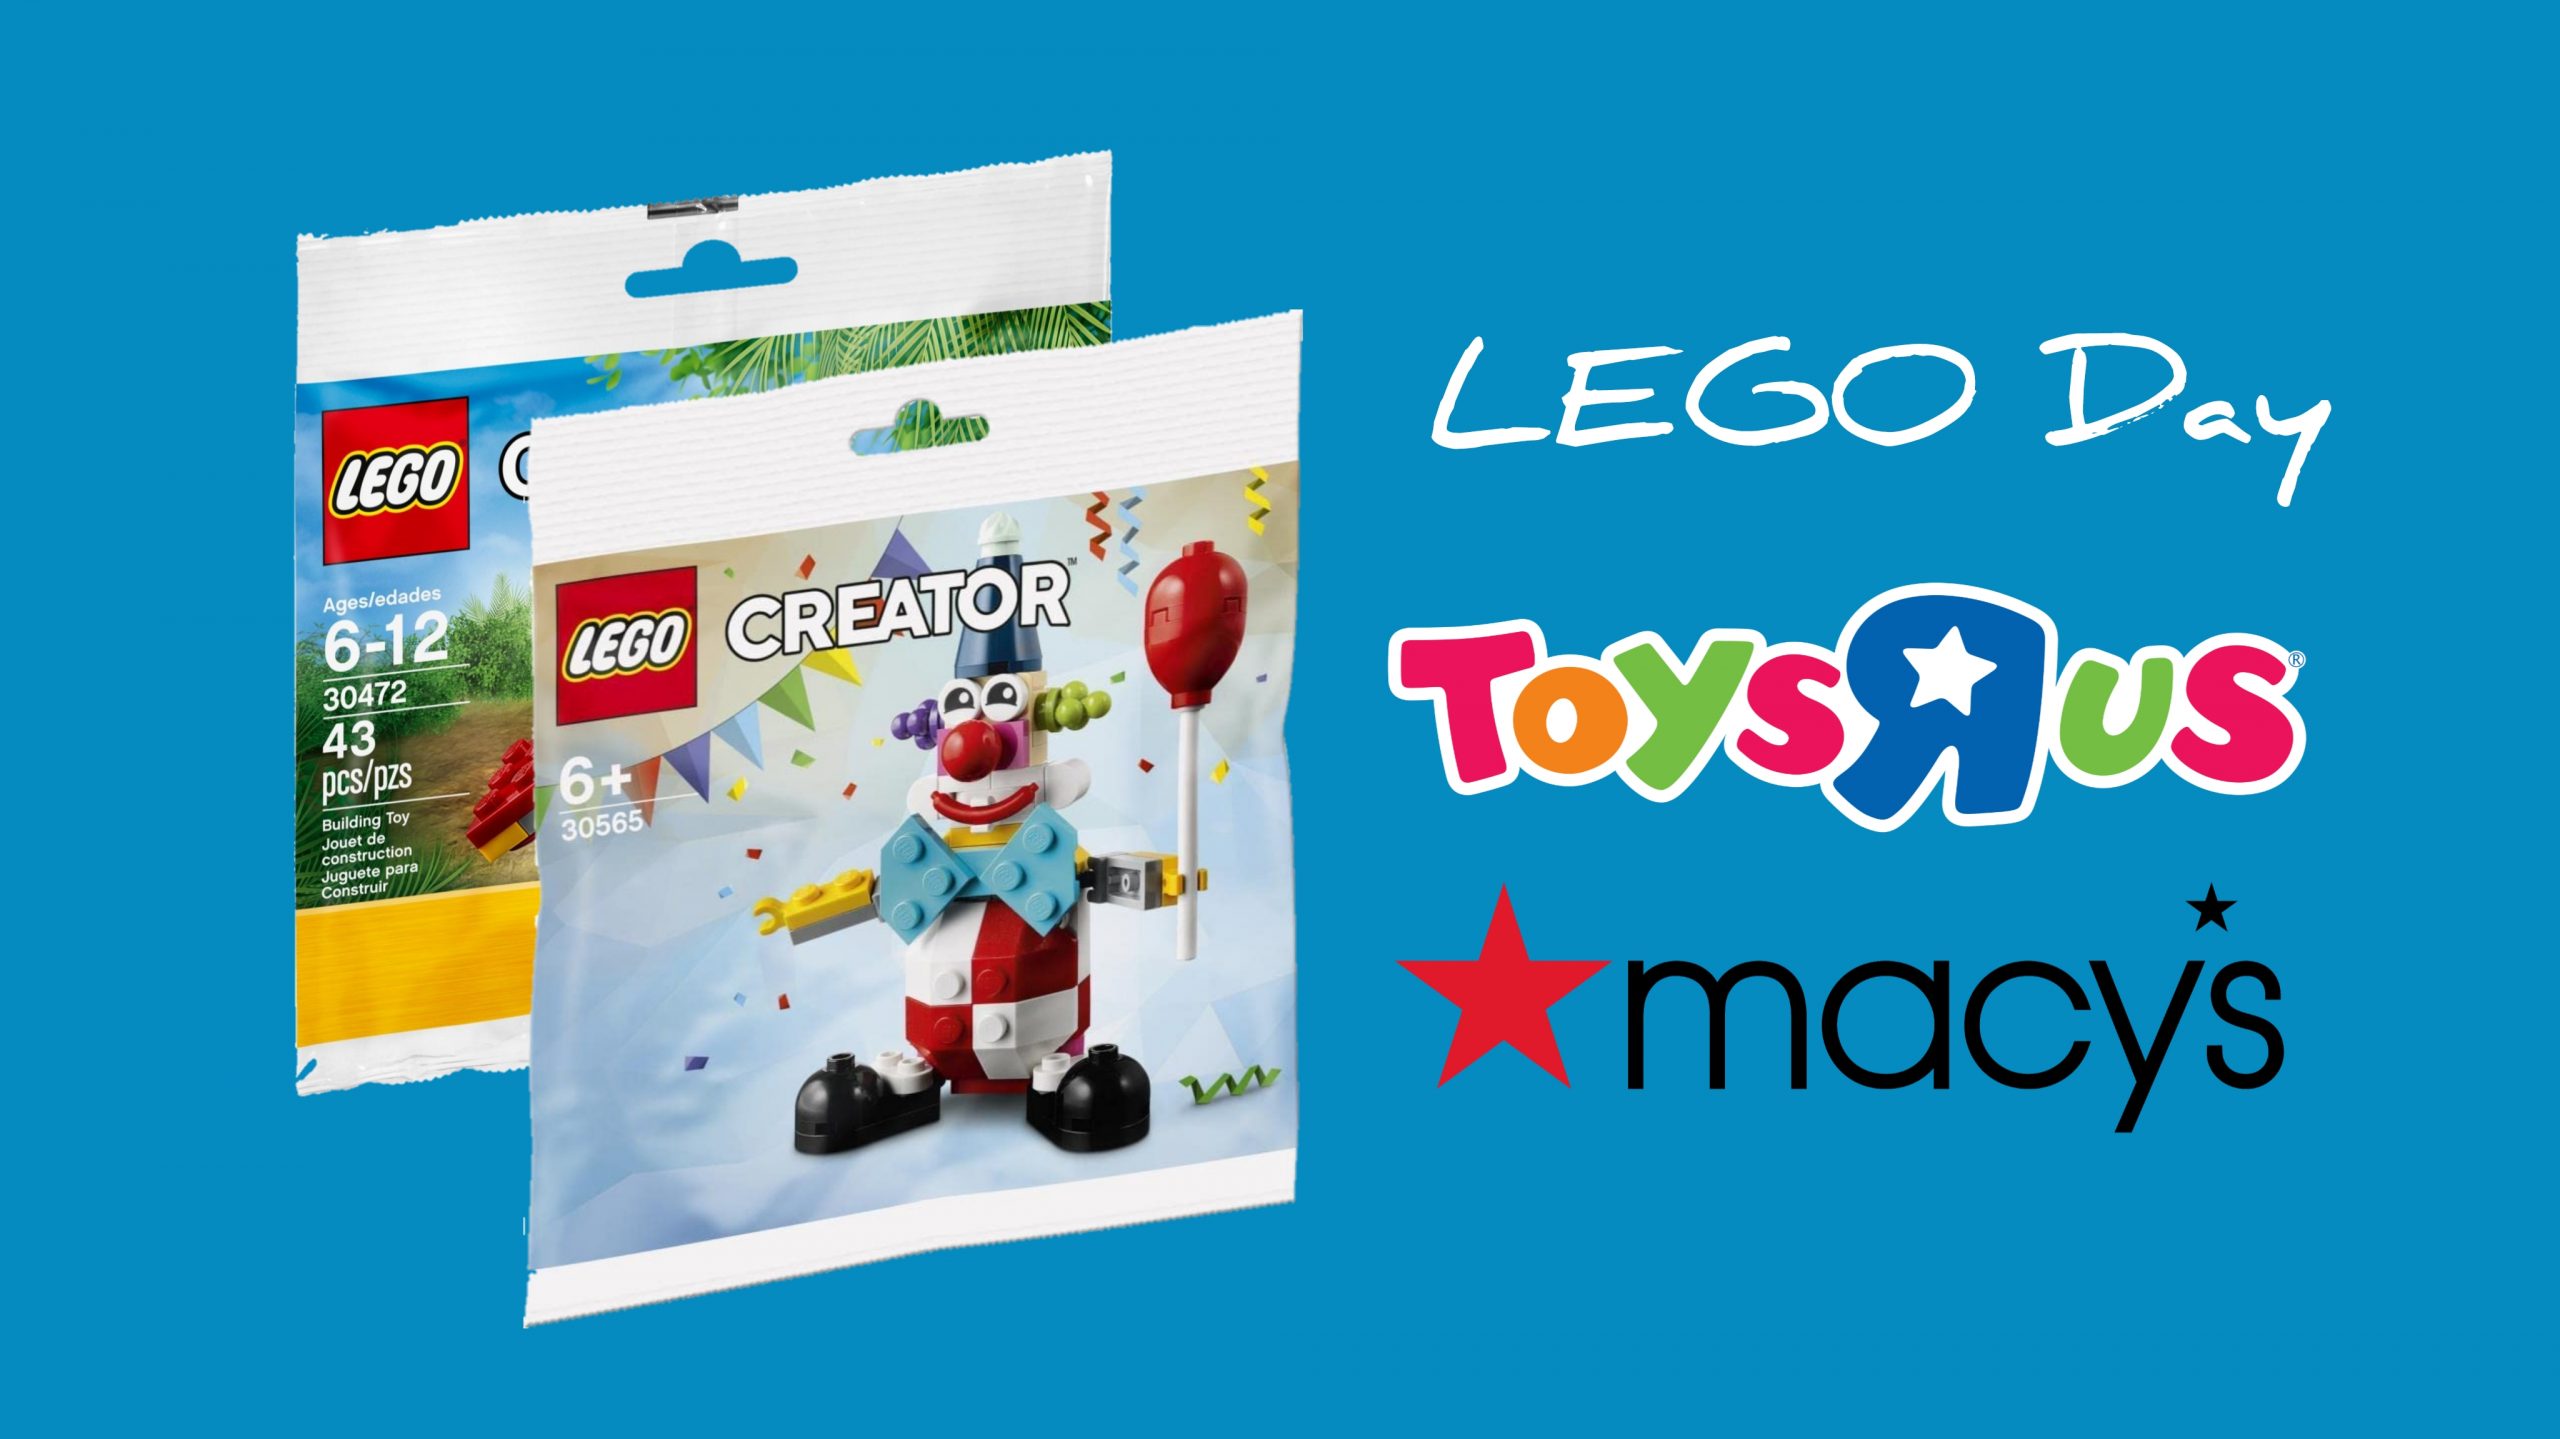 lego-day-event-at-macy-s-toys-r-us-22nd-october-the-brick-post